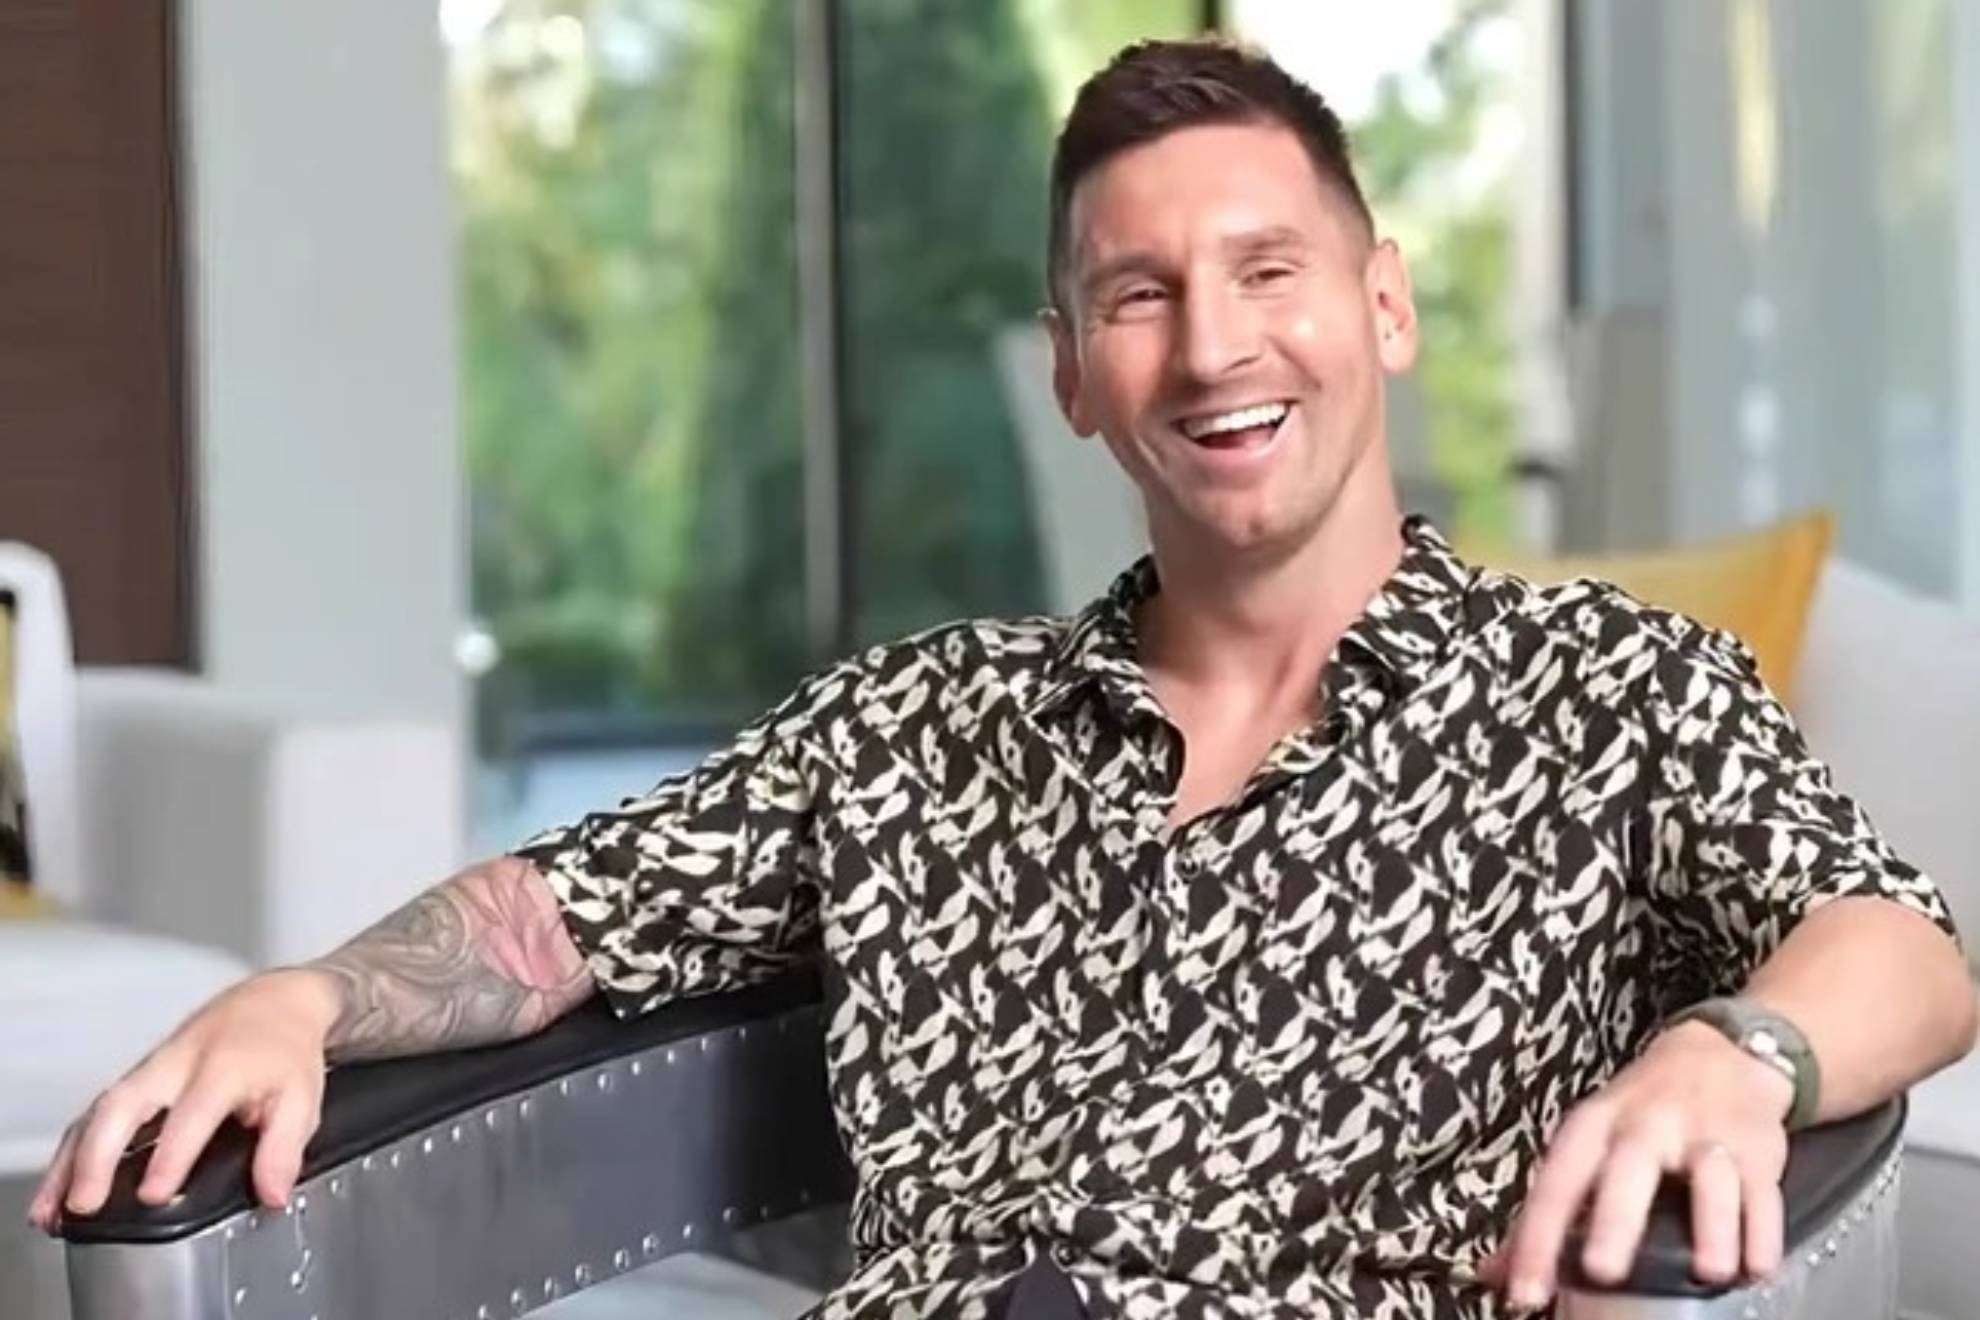 Lionel Messi during his interview with Olga